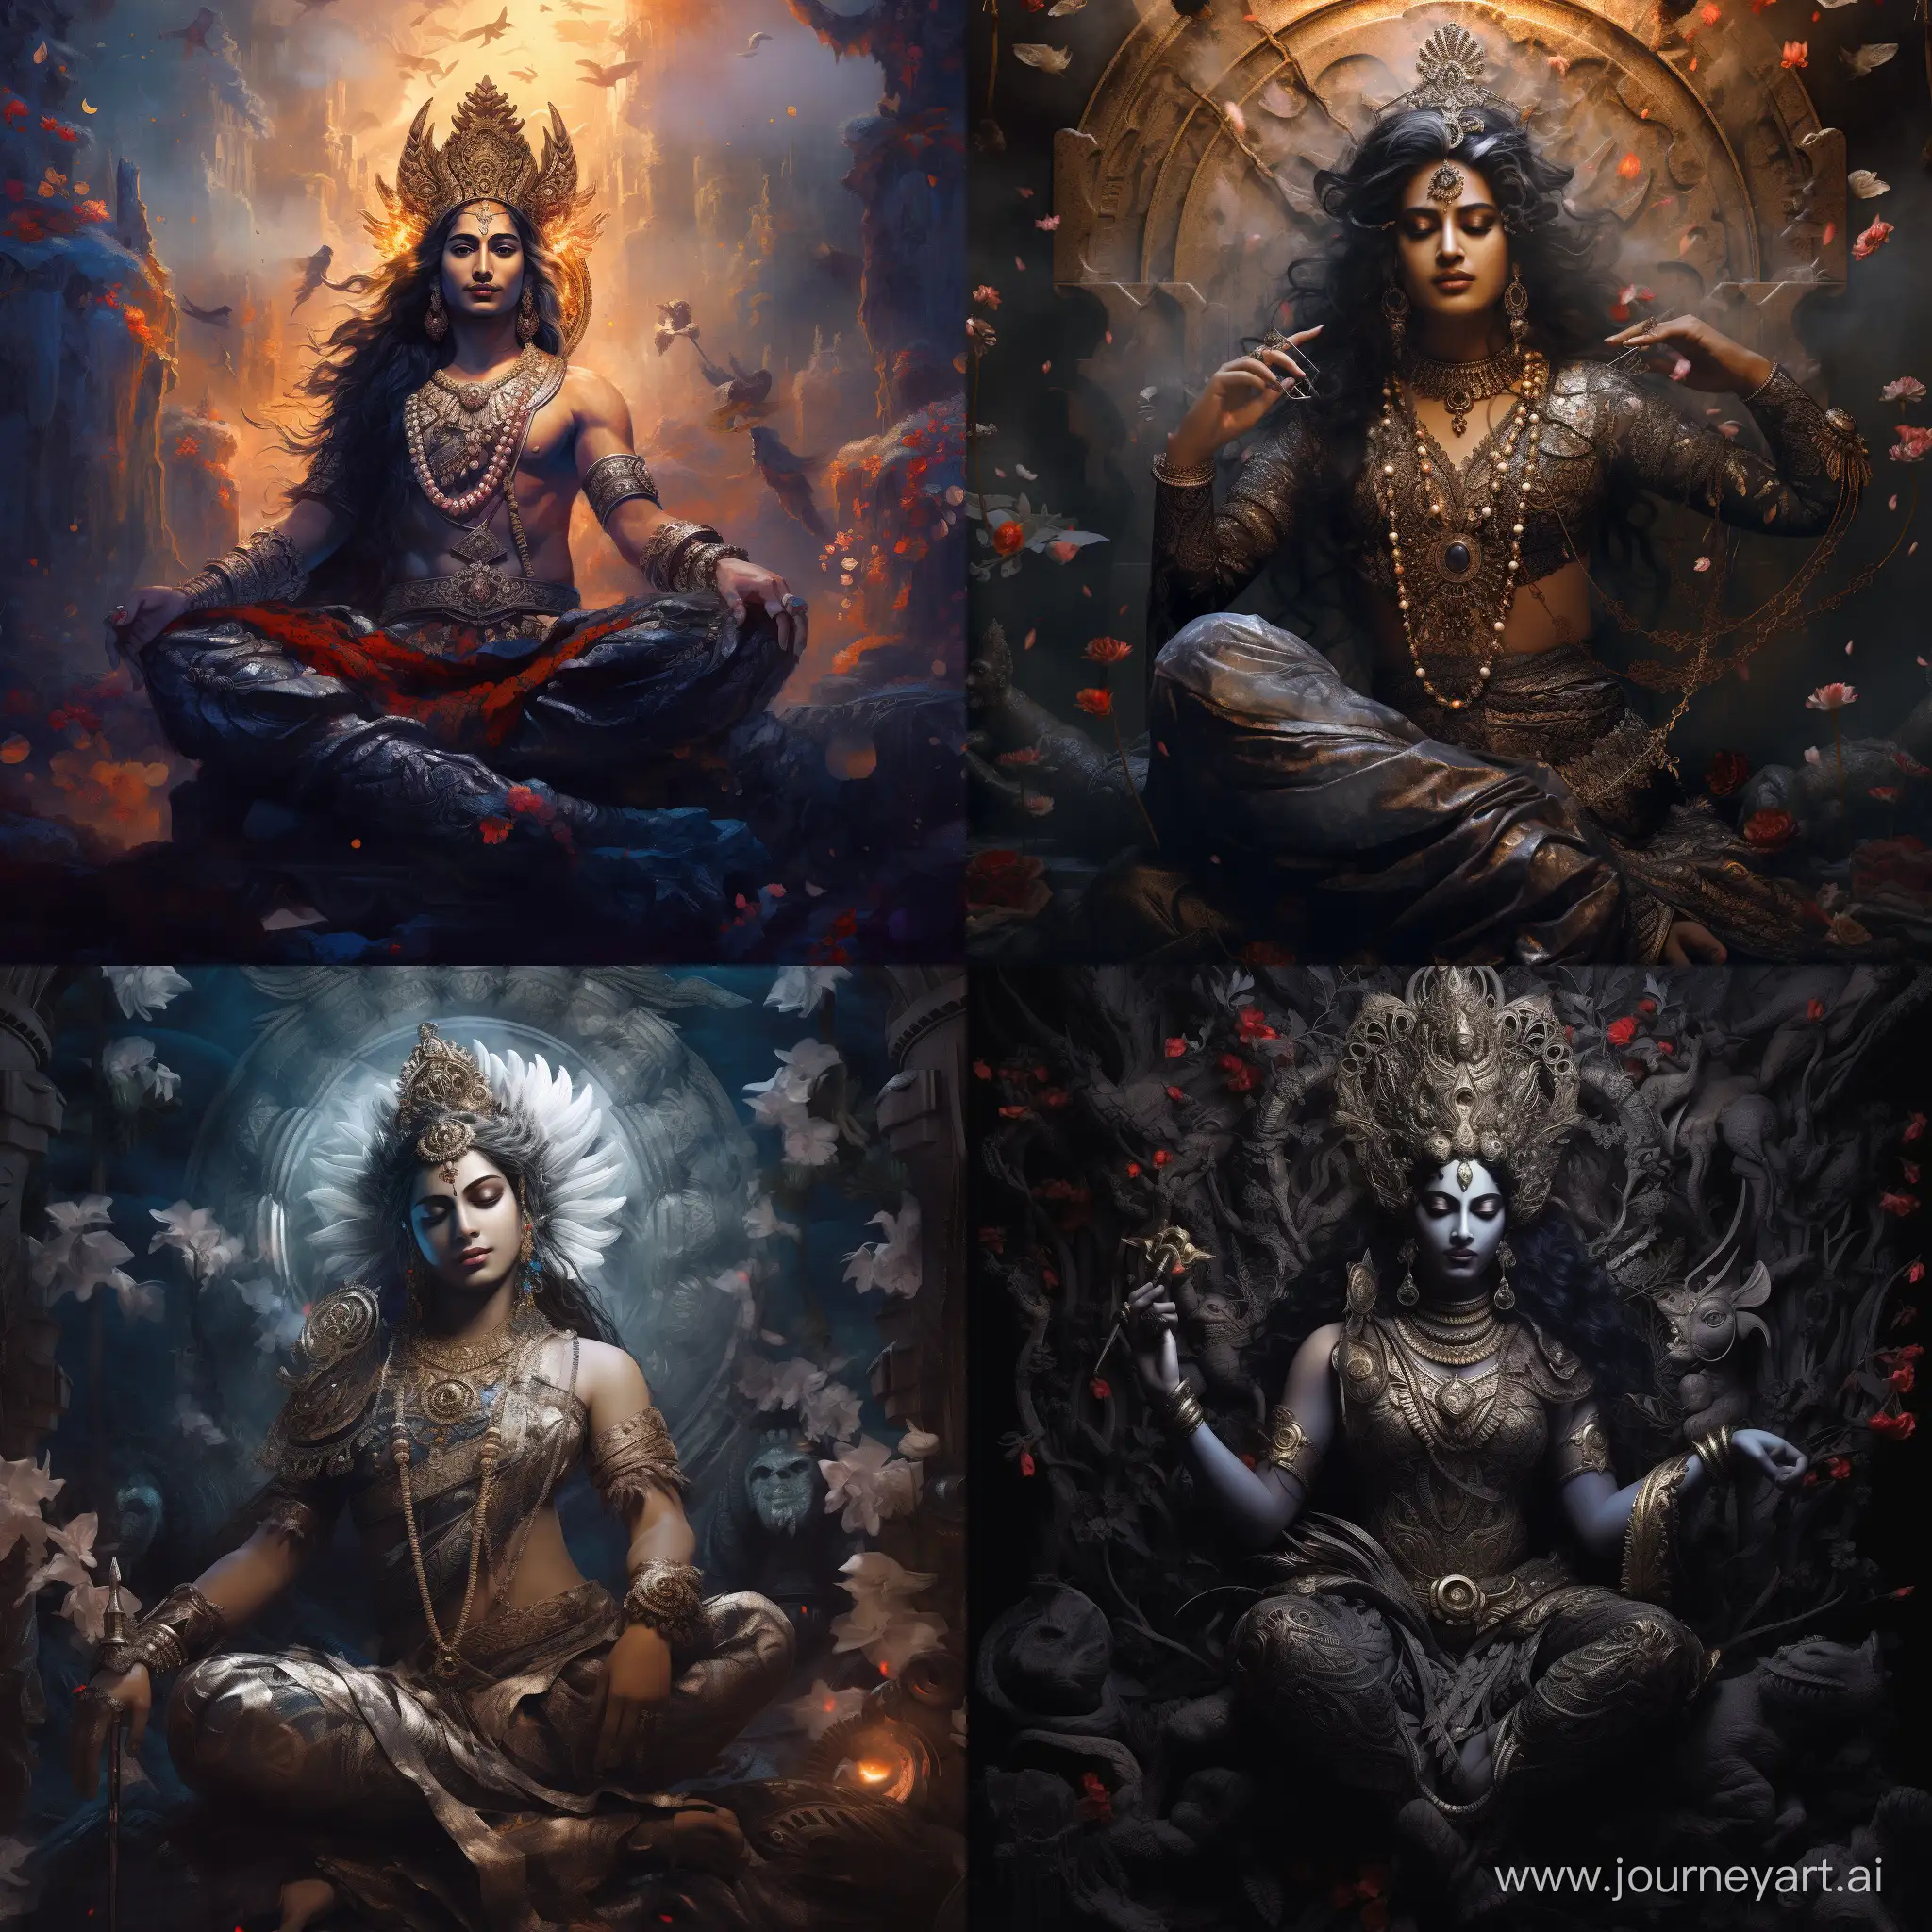 the Indian Hindu god of dreams in a land of dreams with dark undertones and epic lighting, detailed